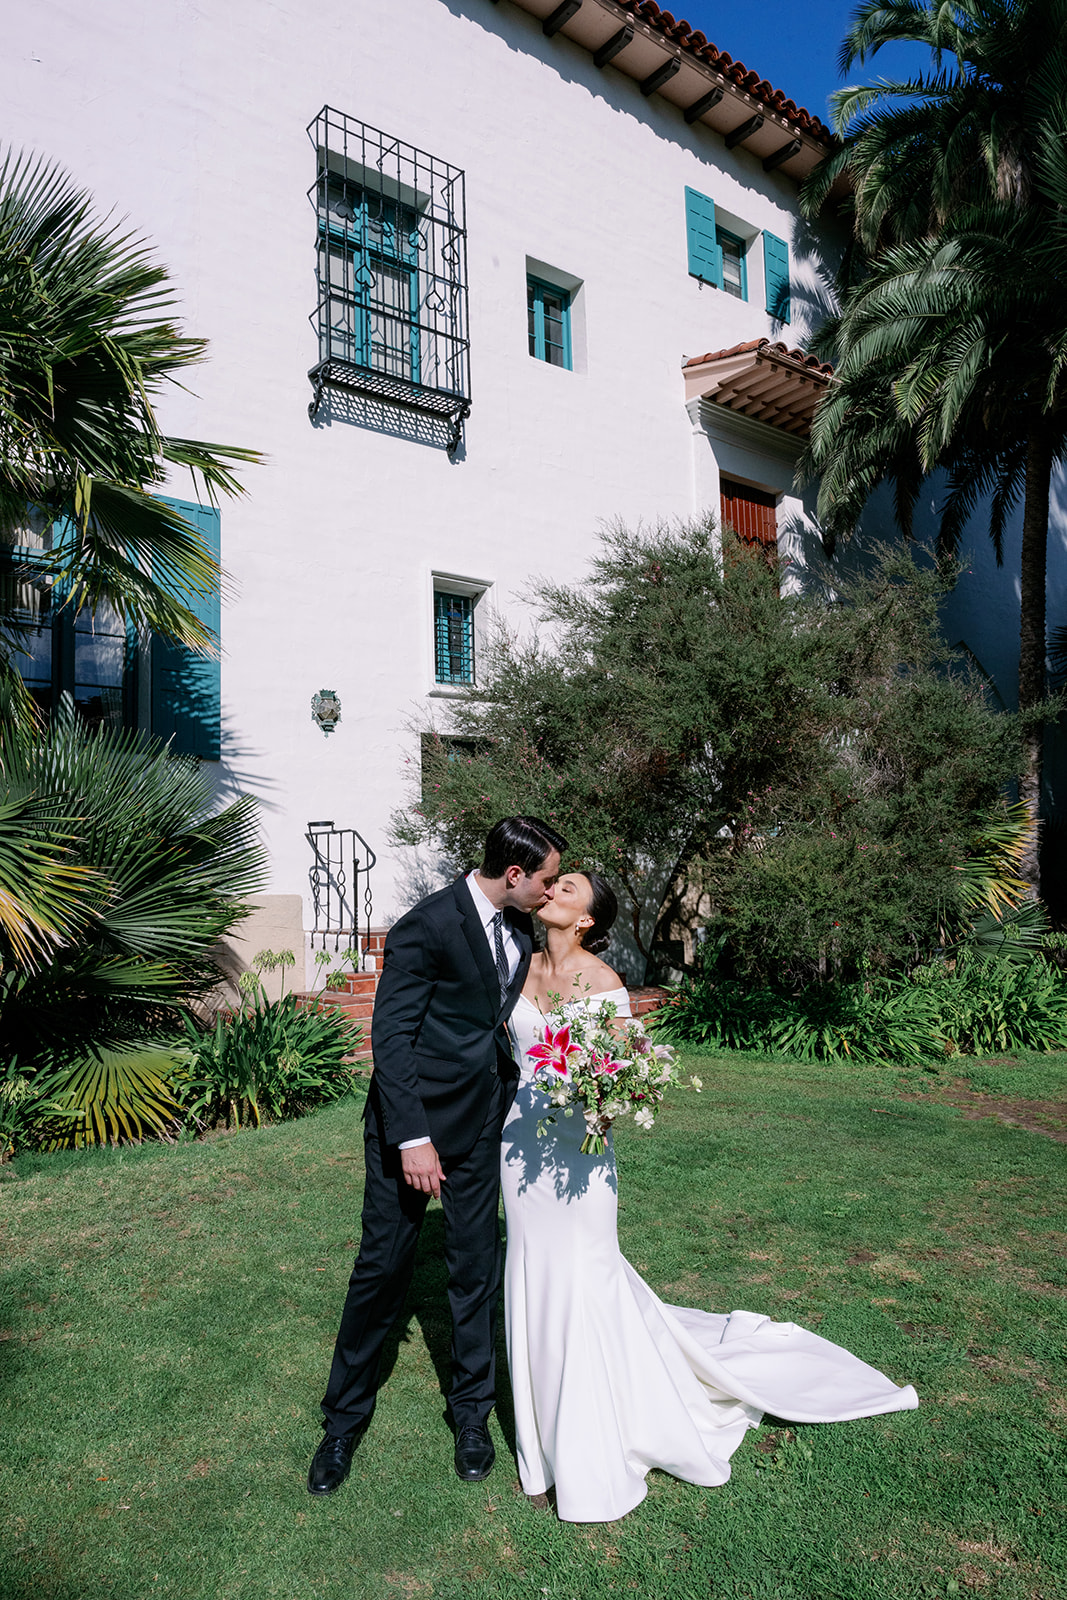 Bride and groom kissing in front of the Santa Barbara Courthouse.